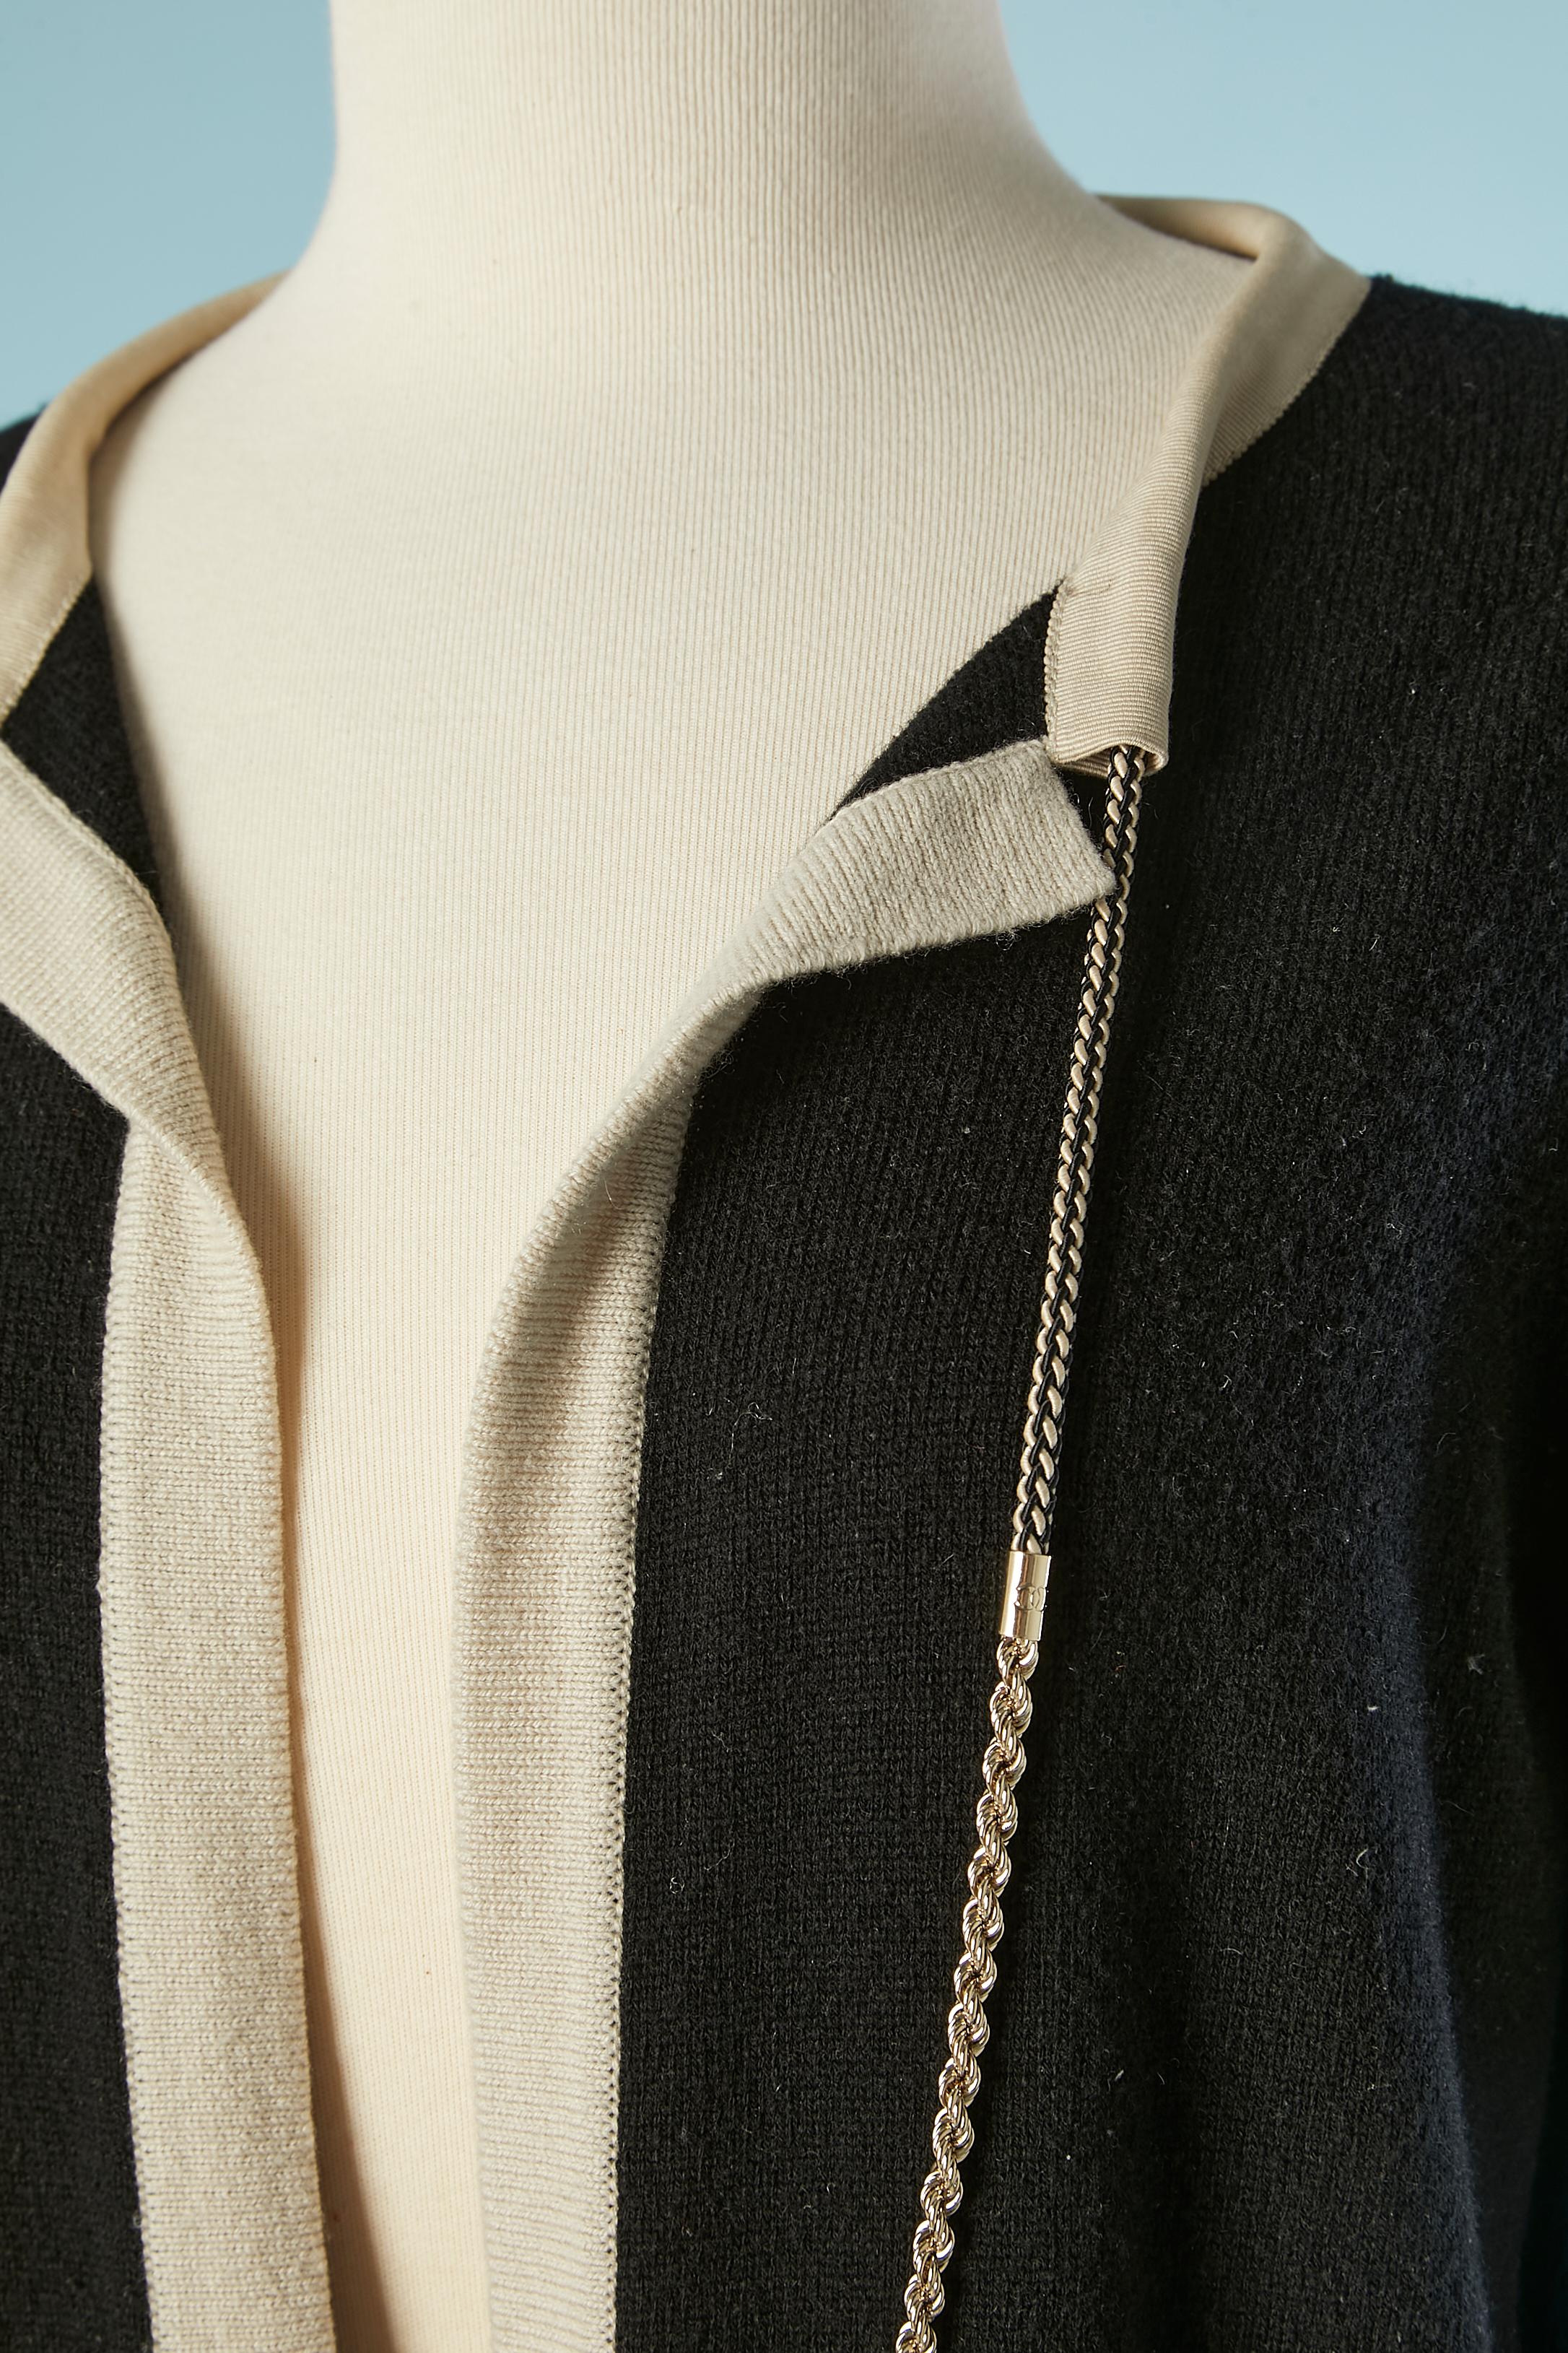 Black and beige cashmere cardigan with chain-neckless. Chain is a mix of metal and polyester string. Can be detachable. Small metallic 